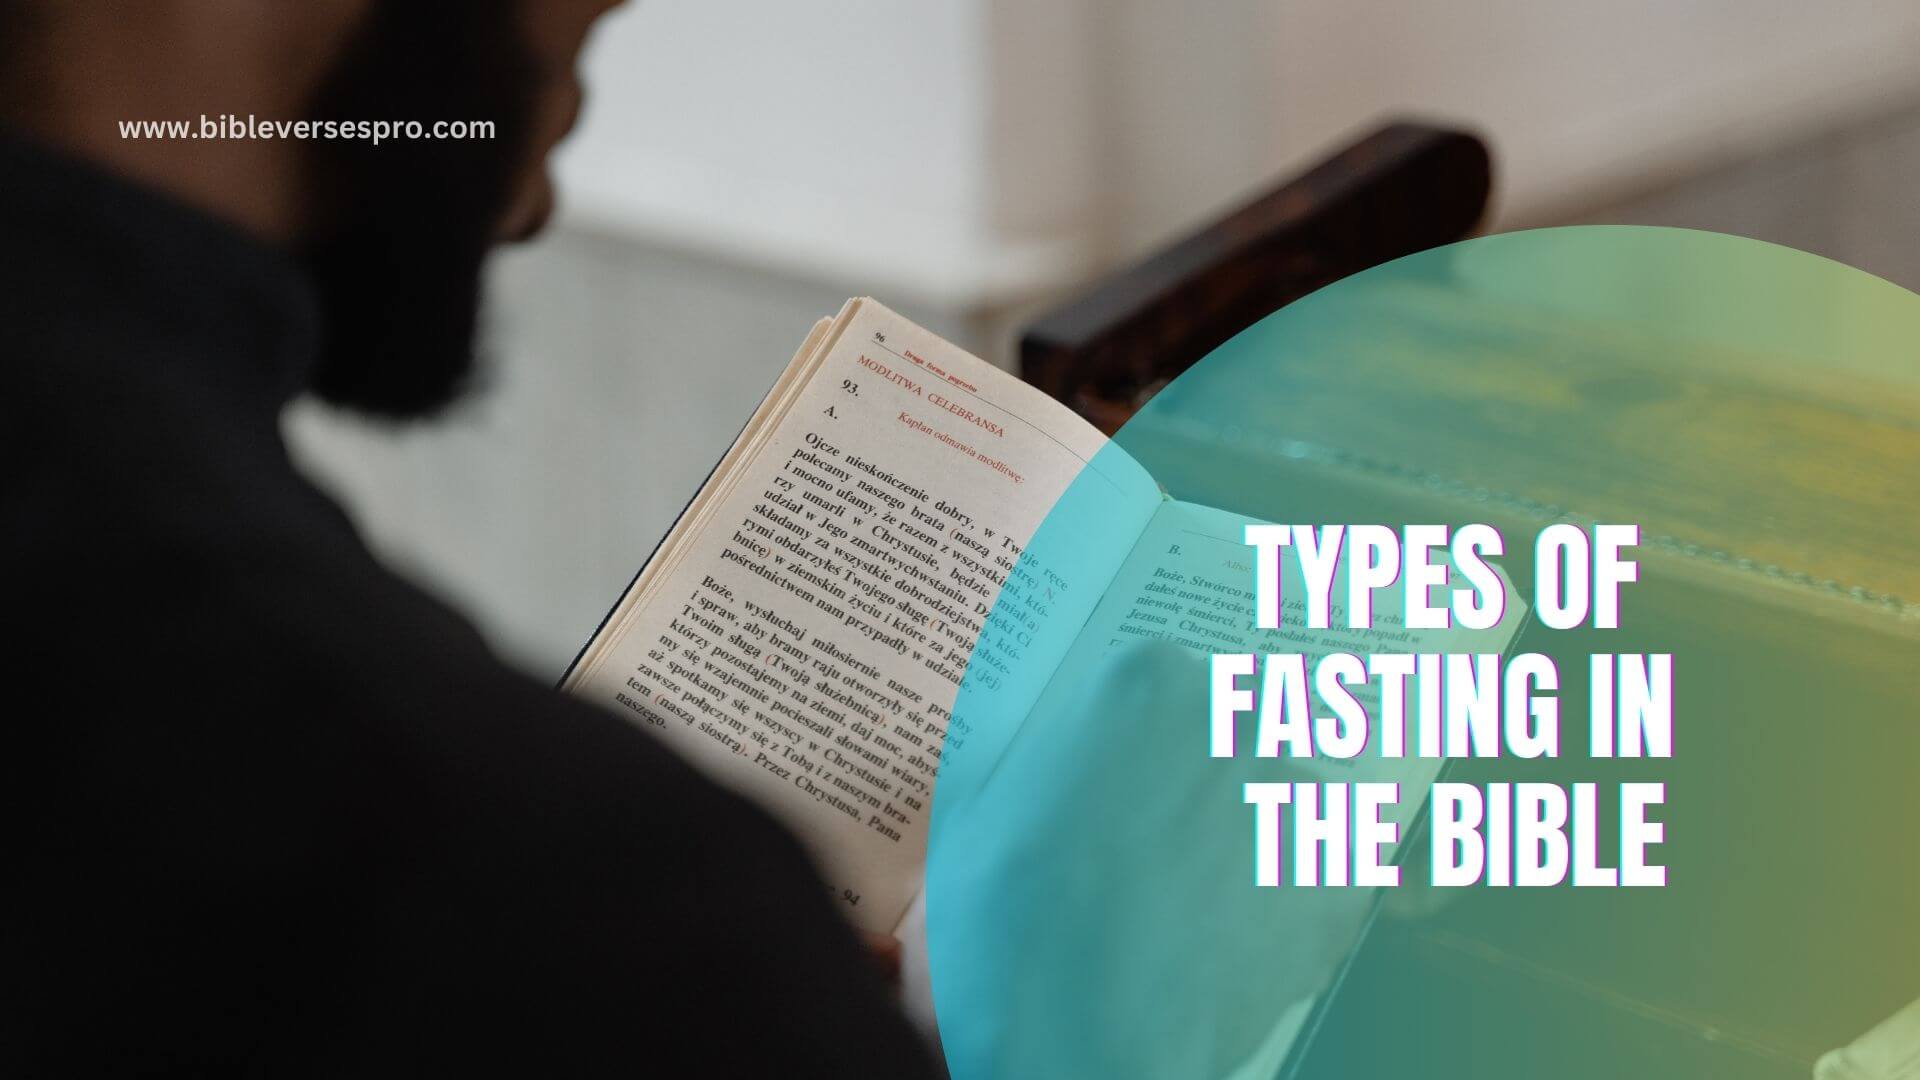 TYPES OF FASTING IN THE BIBLE (1)